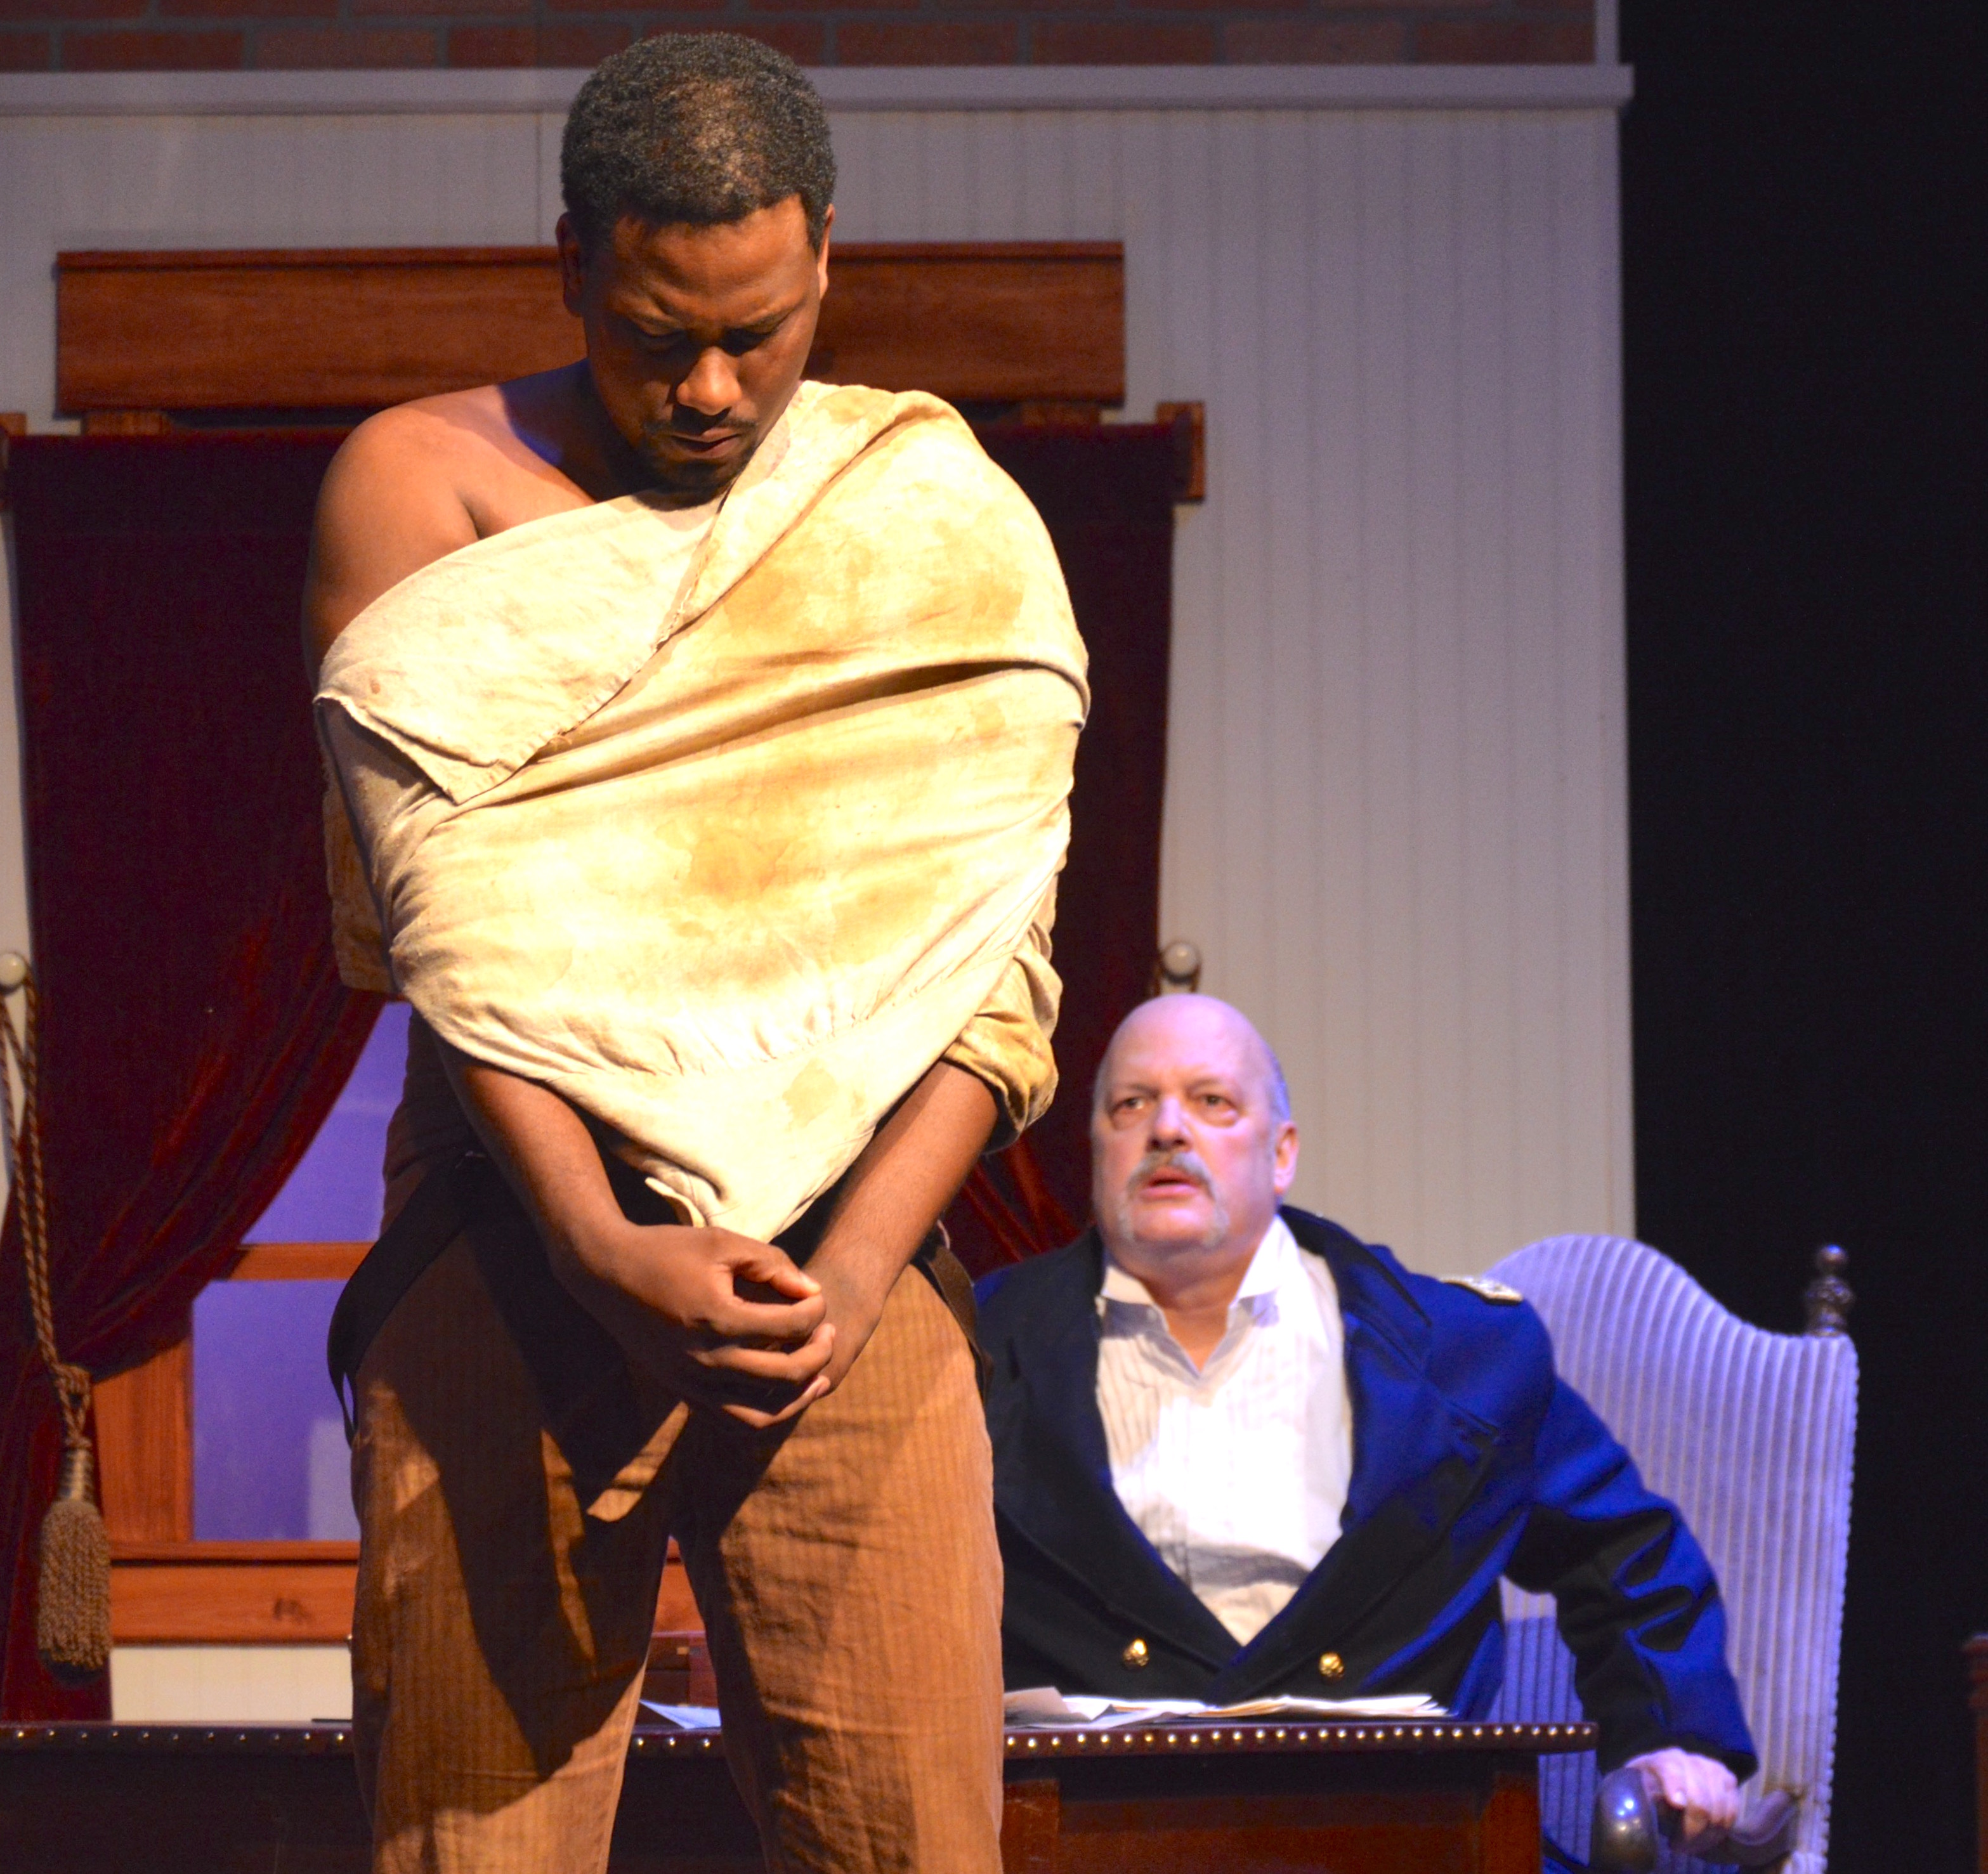 Shepard Mallory, played by Sharif Ali, shows Butler, played by Michael Mendonsa, scars from being whipped.